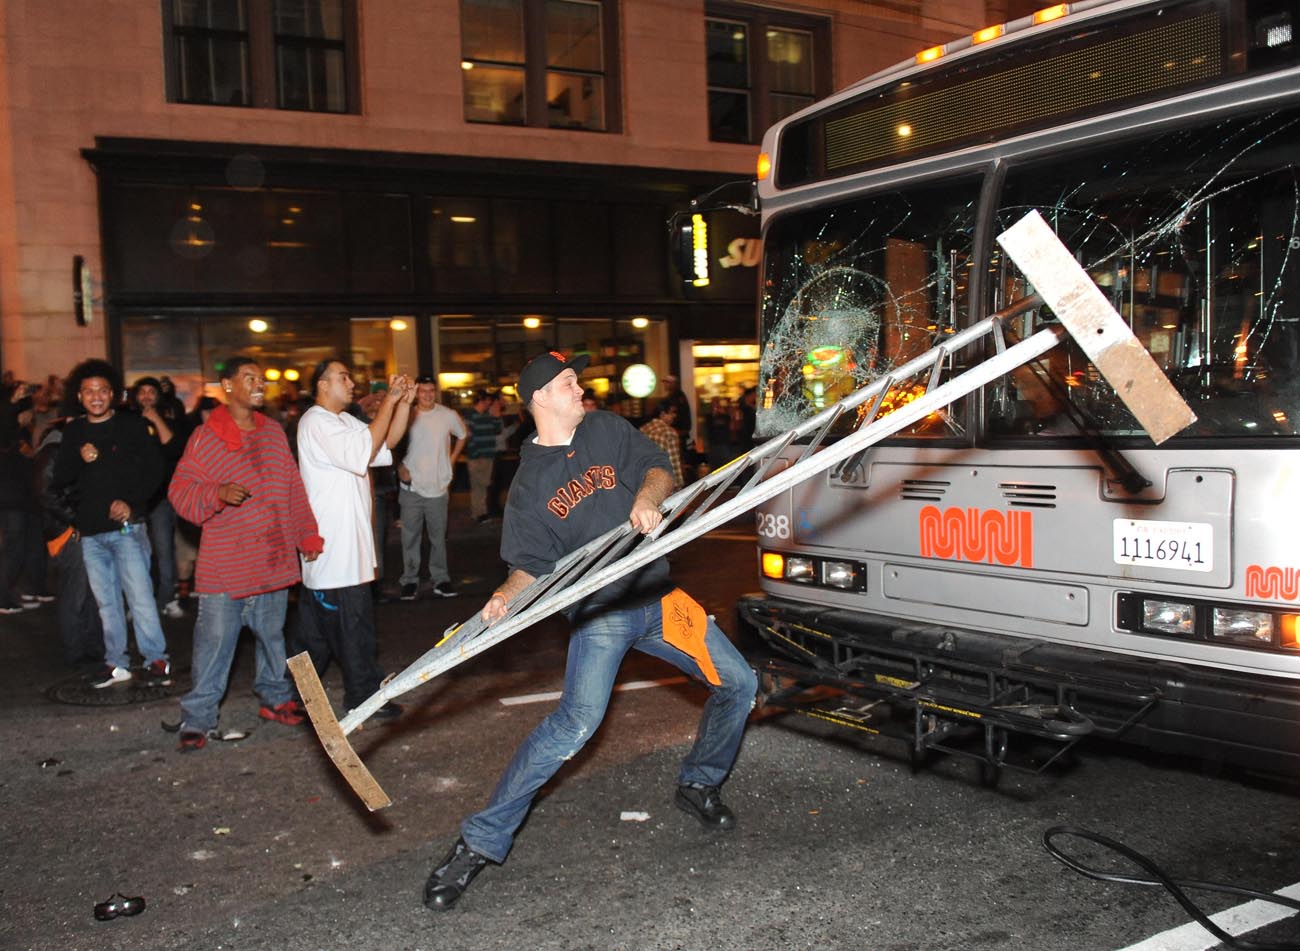 Gregory Graniss smashes a Muni bus windshield with a police barricade in San Francisco after the Giants won the World Series on October 28, 2012. Graniss was later charged with felony vandalism and pleaded not guilty.